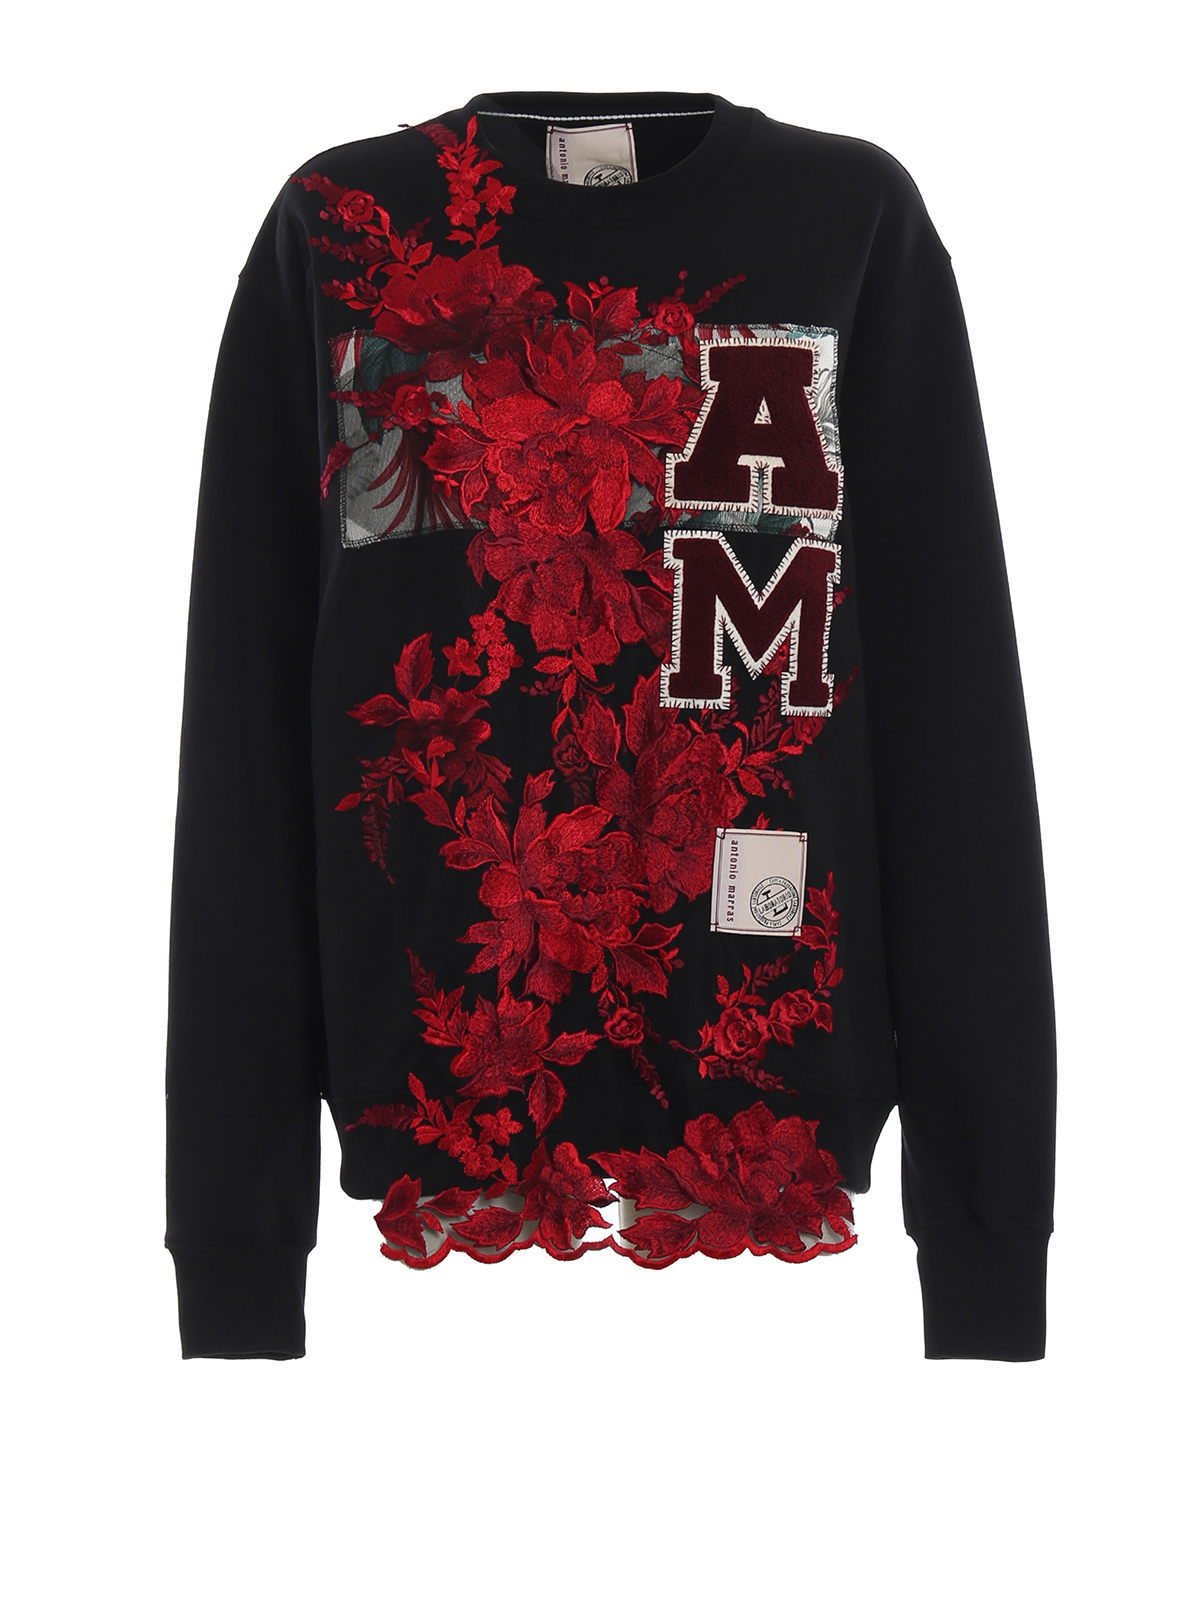 Sweatshirts & Sweaters Marras - Maxi floral embroidery cotton over sweatshirt -